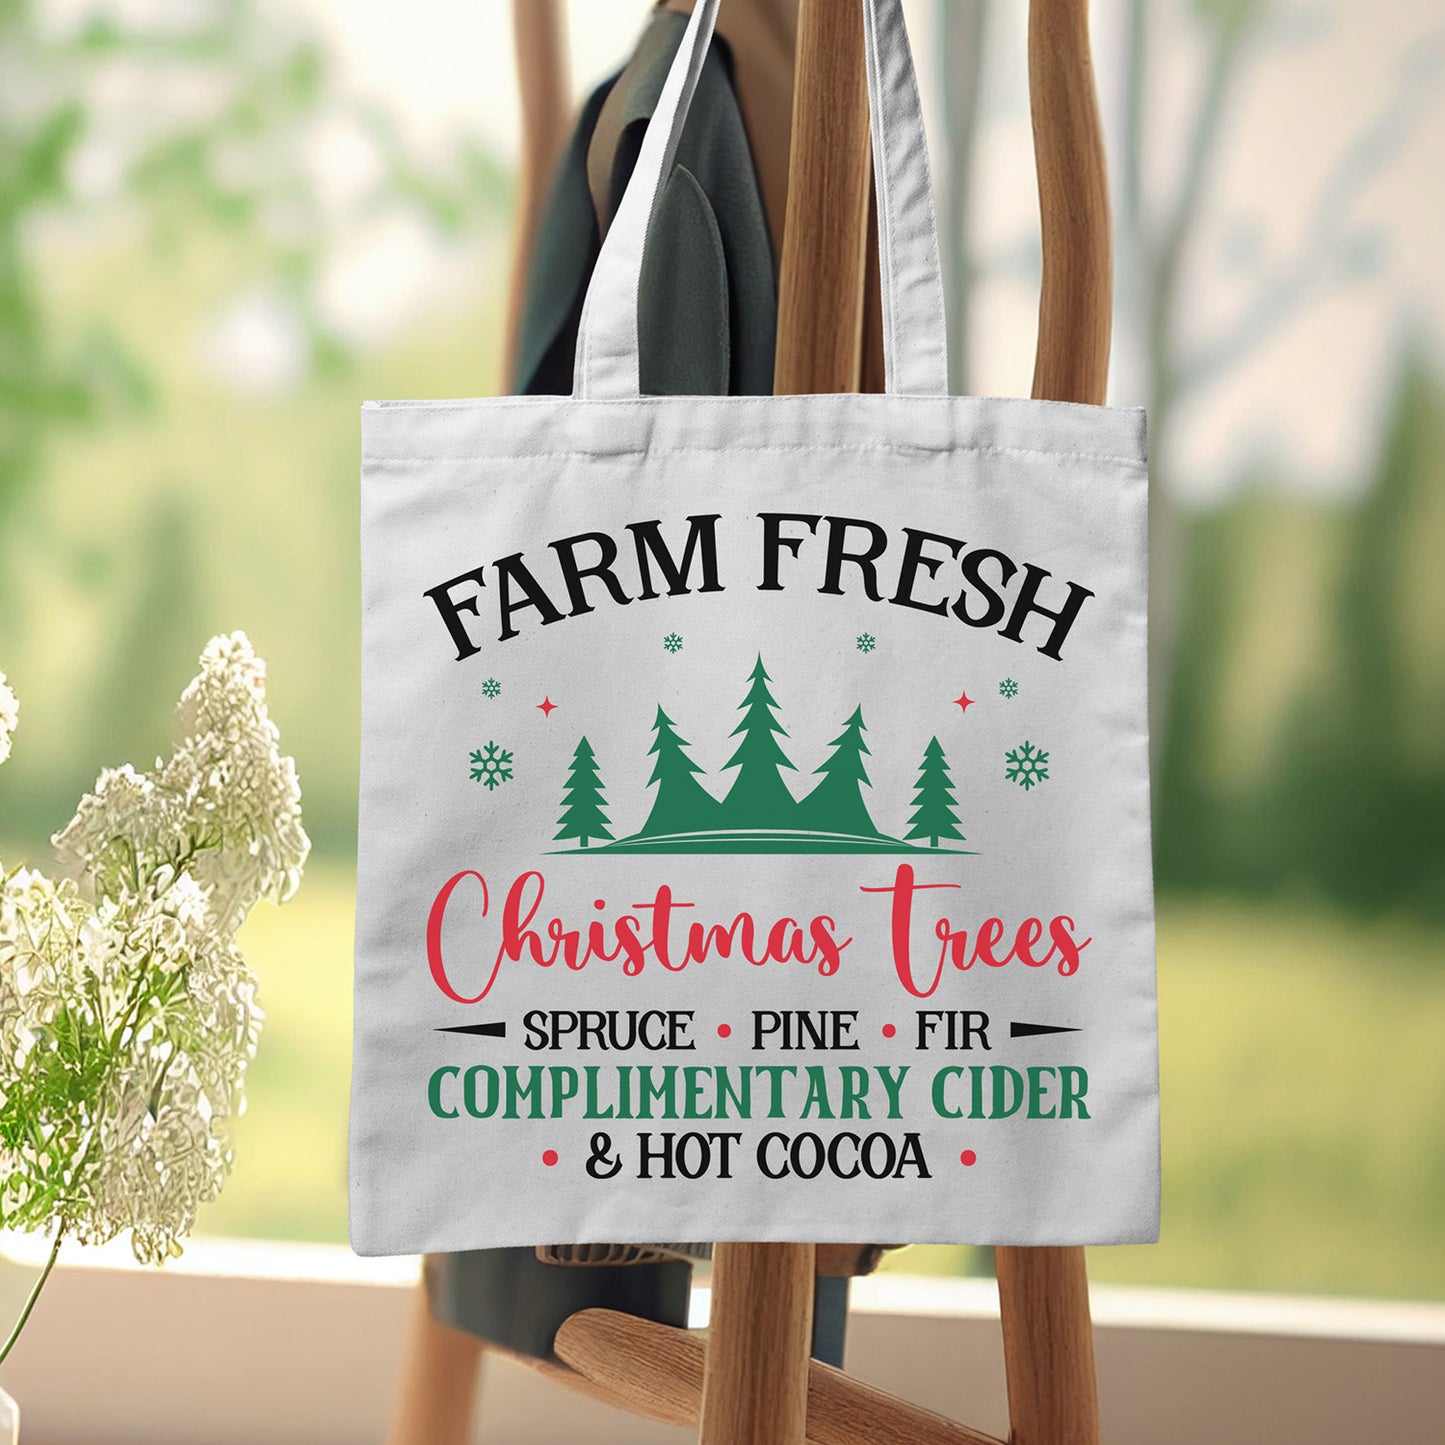 "Farm Fresh Christmas Trees Spruce Pine Fir Complimentary Cider & Hot Cocoa" Graphic